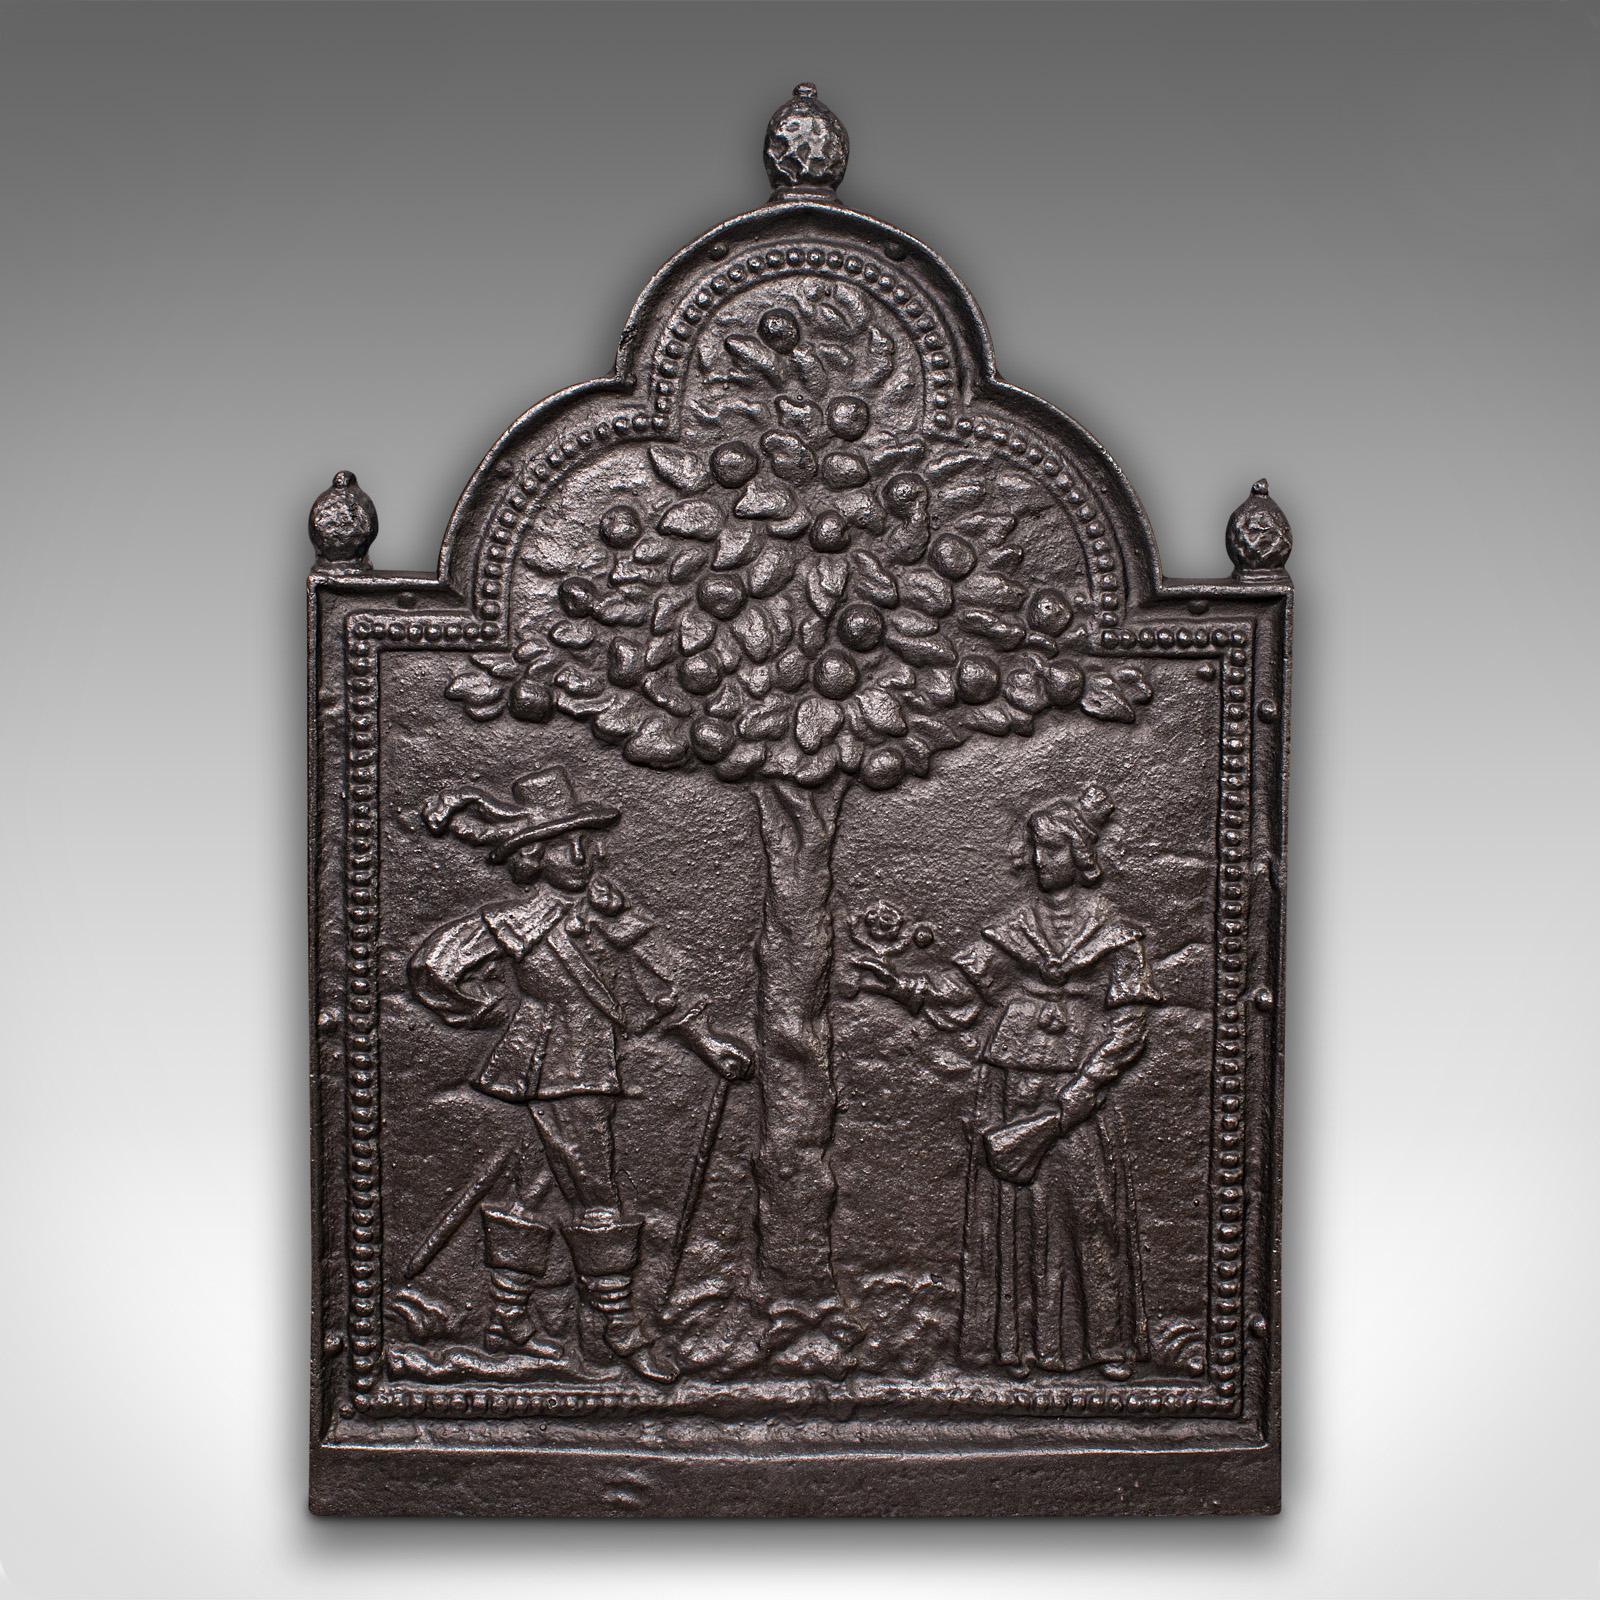 This is an antique decorative fire back. An English, cast iron fireplace hearth backrest with Tree of Life scene, dating to the late Victorian period, circa 1900.

Pleasingly cast with a pair of figures and Tree of Life motif
Displays a desirable